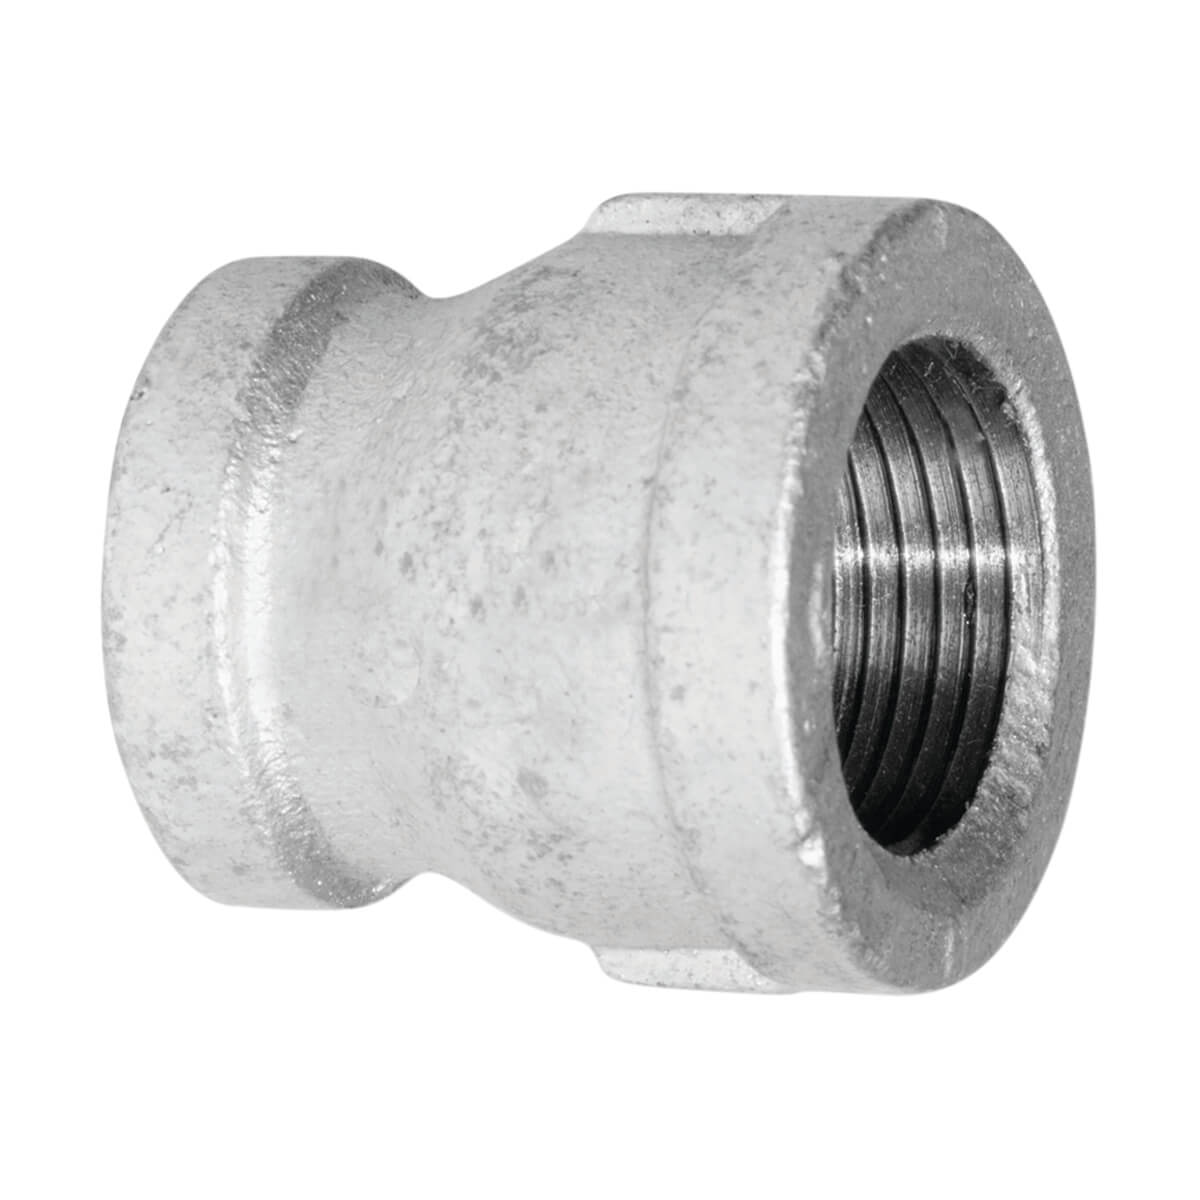 Fitting Galvanized Iron Coupling - 1-¼-in x 1-in